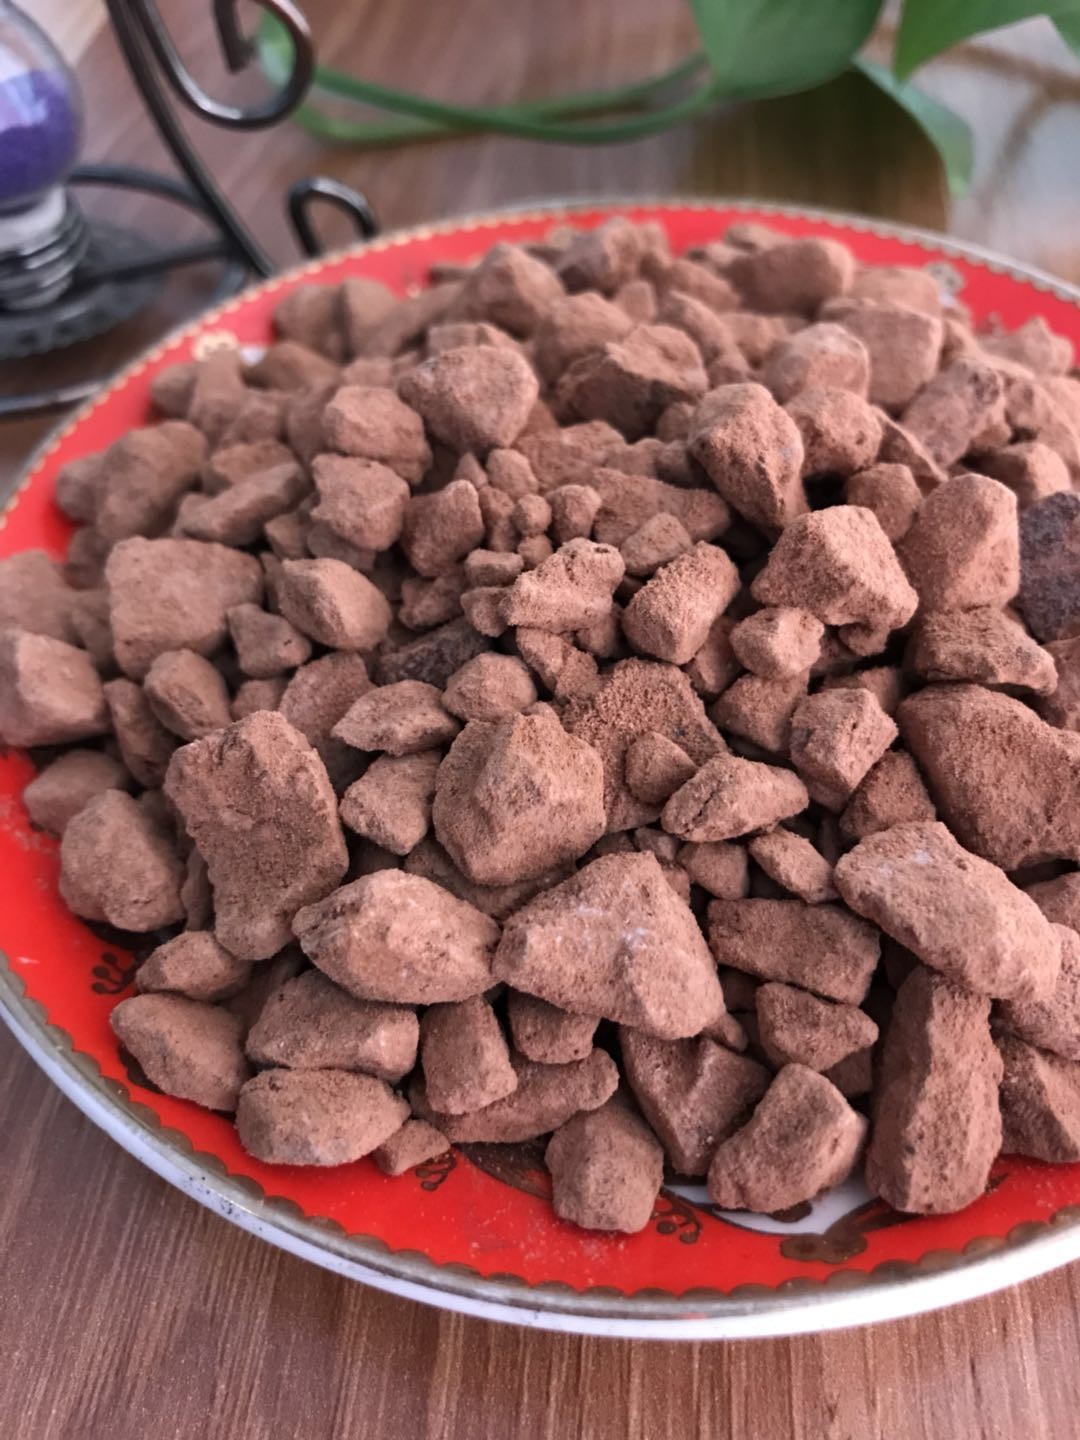 Cheap Unsweetened 100 Raw Cacao Powder Keep In A Cool Dry Place For Chocolate Raw Material wholesale